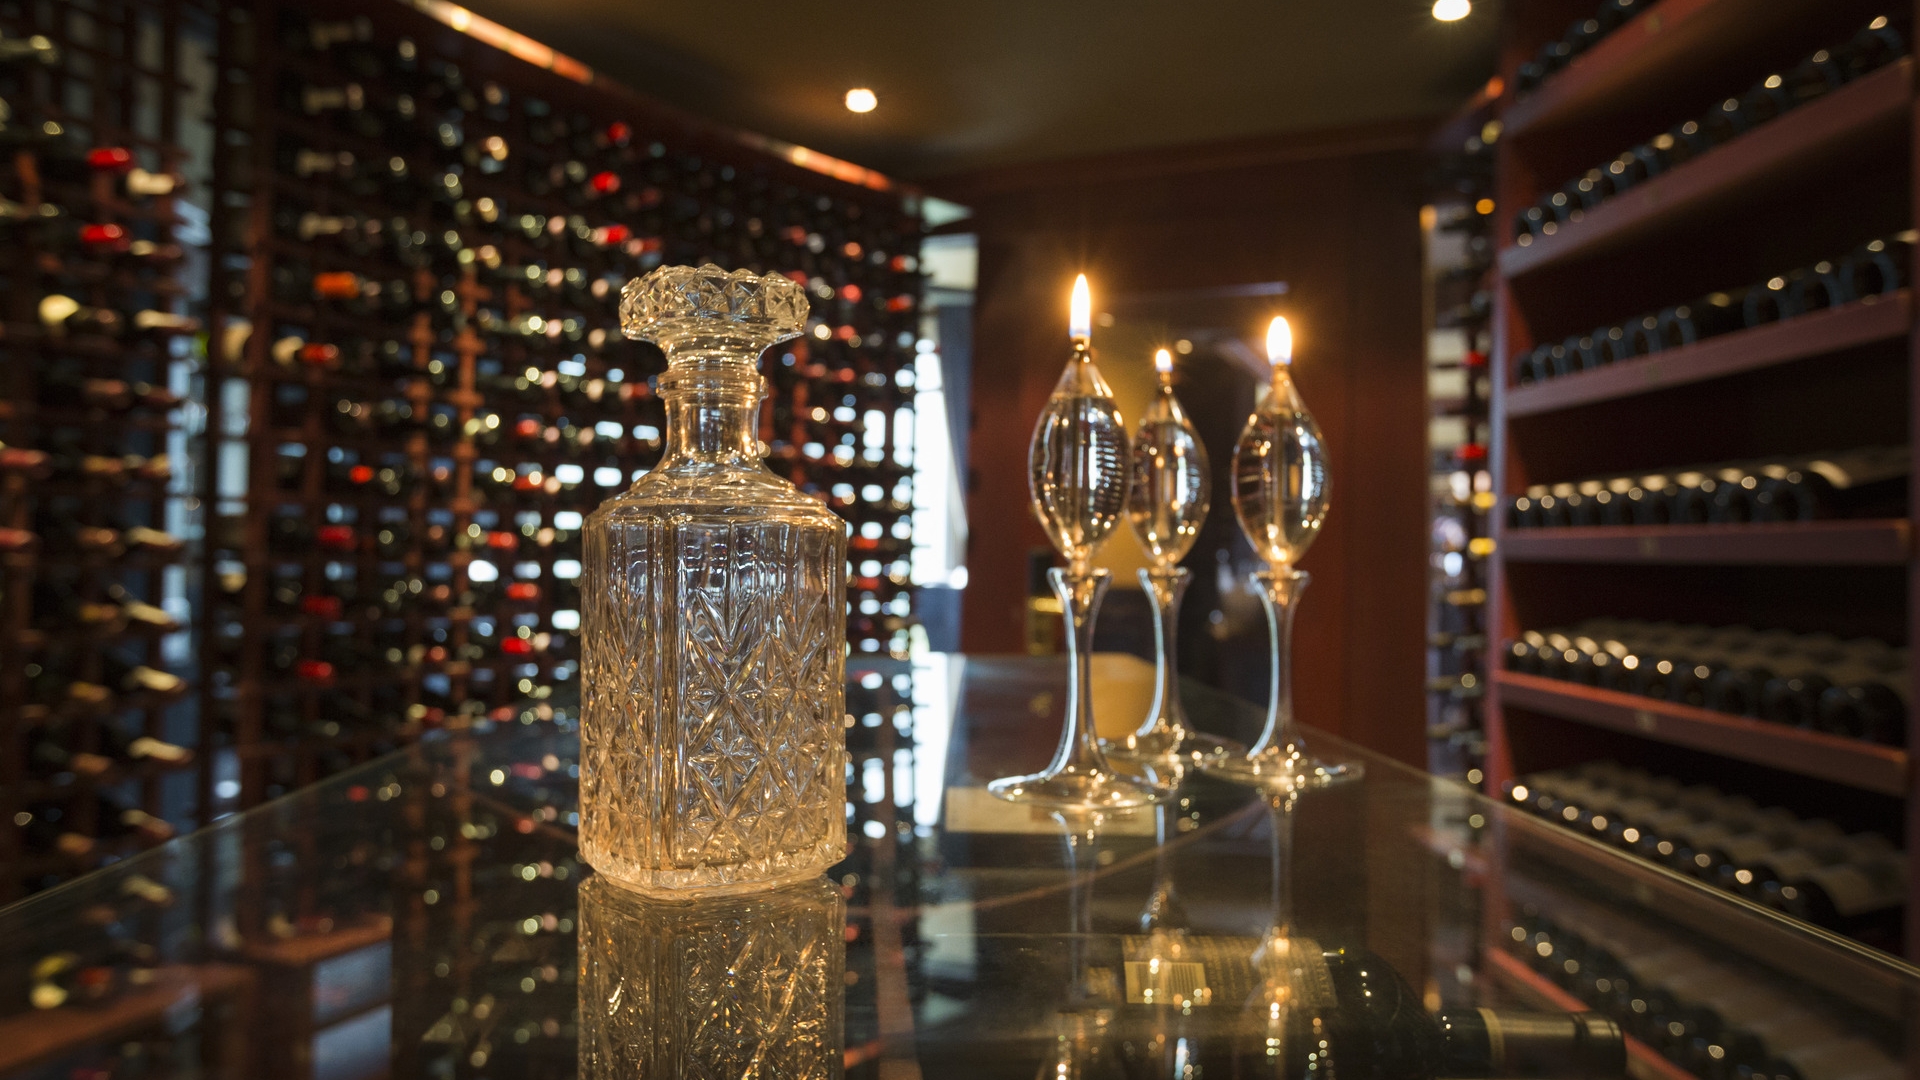 A decanter in the foreground and wines in shelves at the background